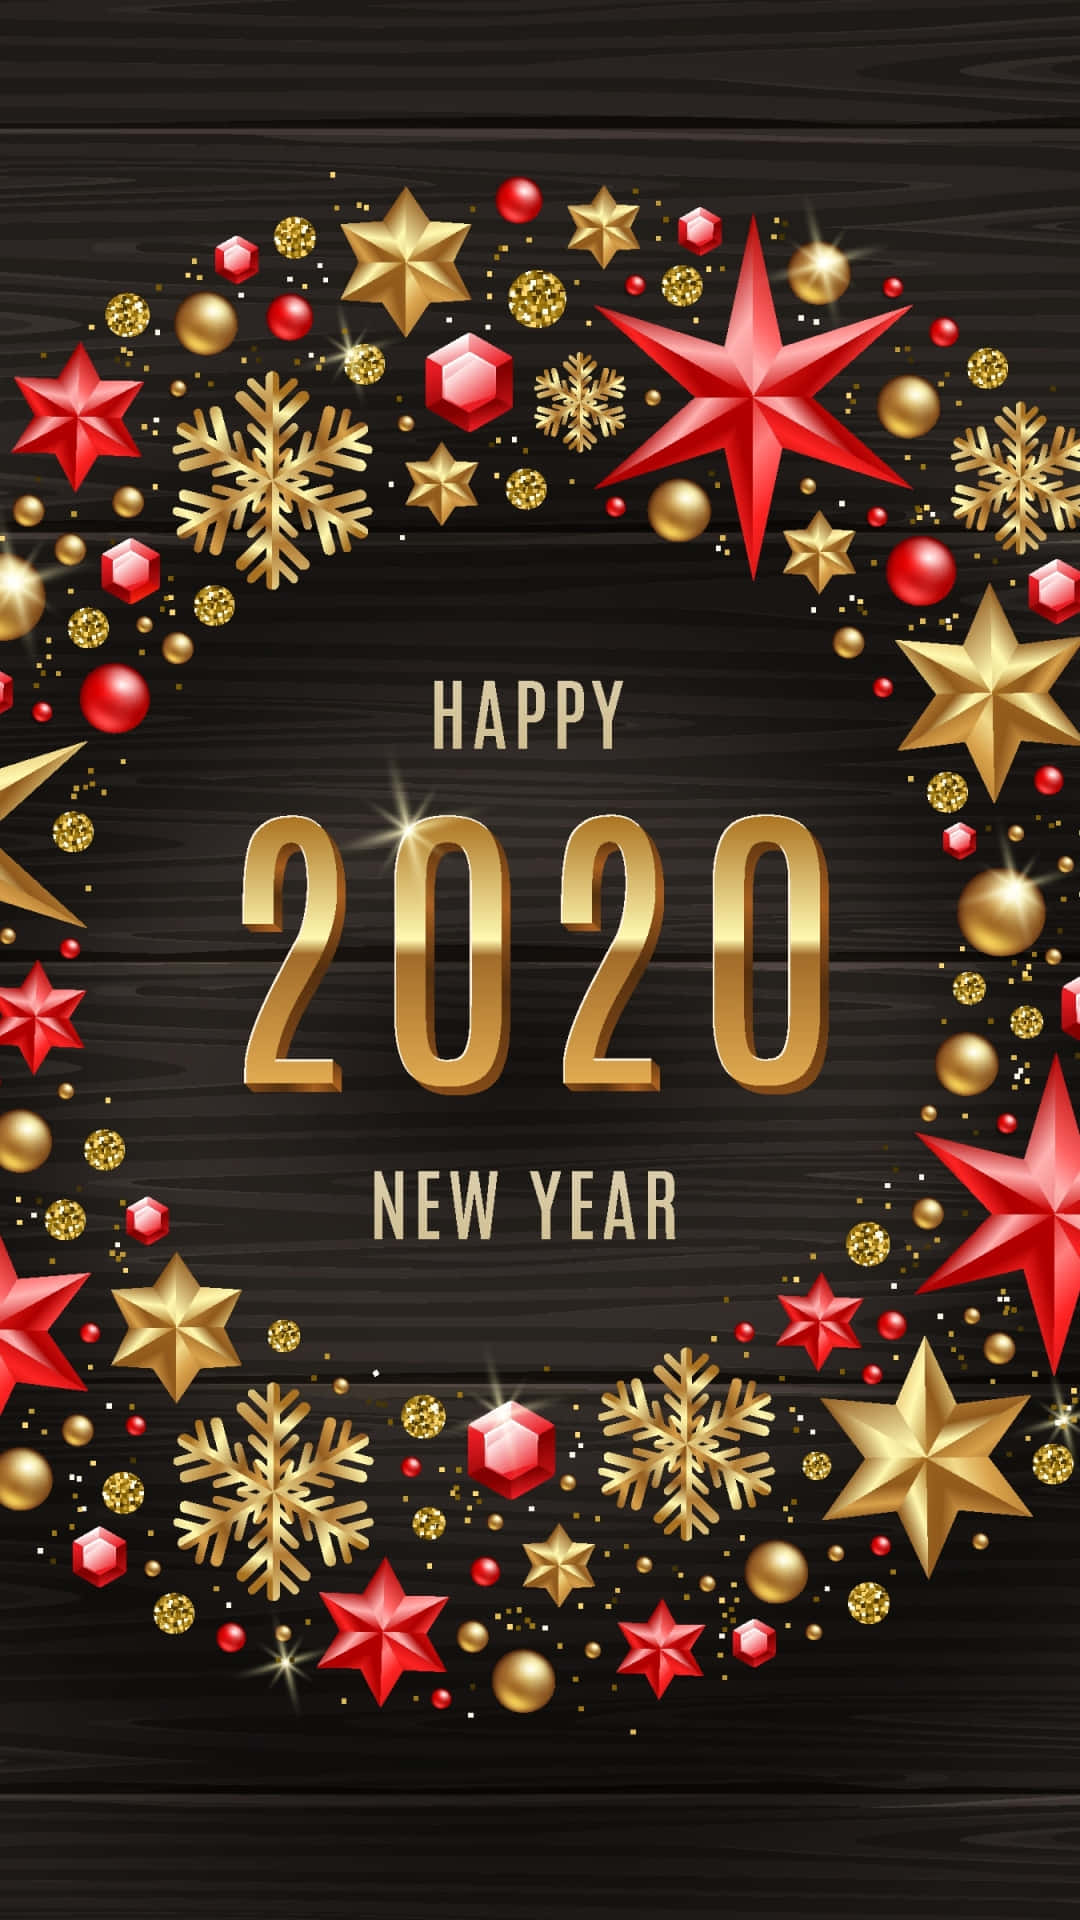 Happy New Year 2020 With Golden Stars And Snowflakes On A Black Background Wallpaper